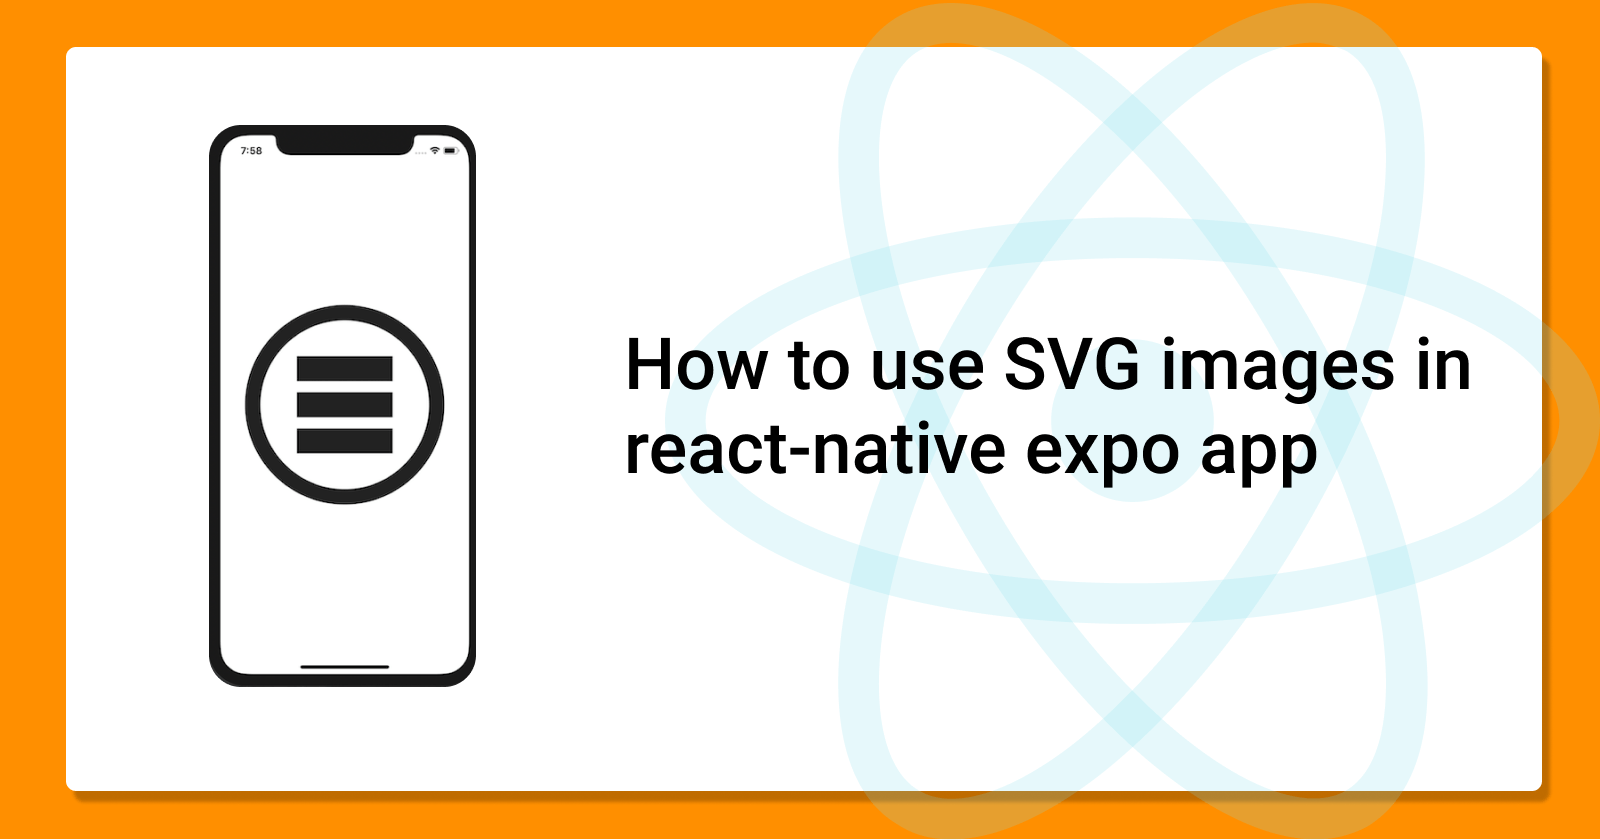 How to use SVG images in react-native expo app